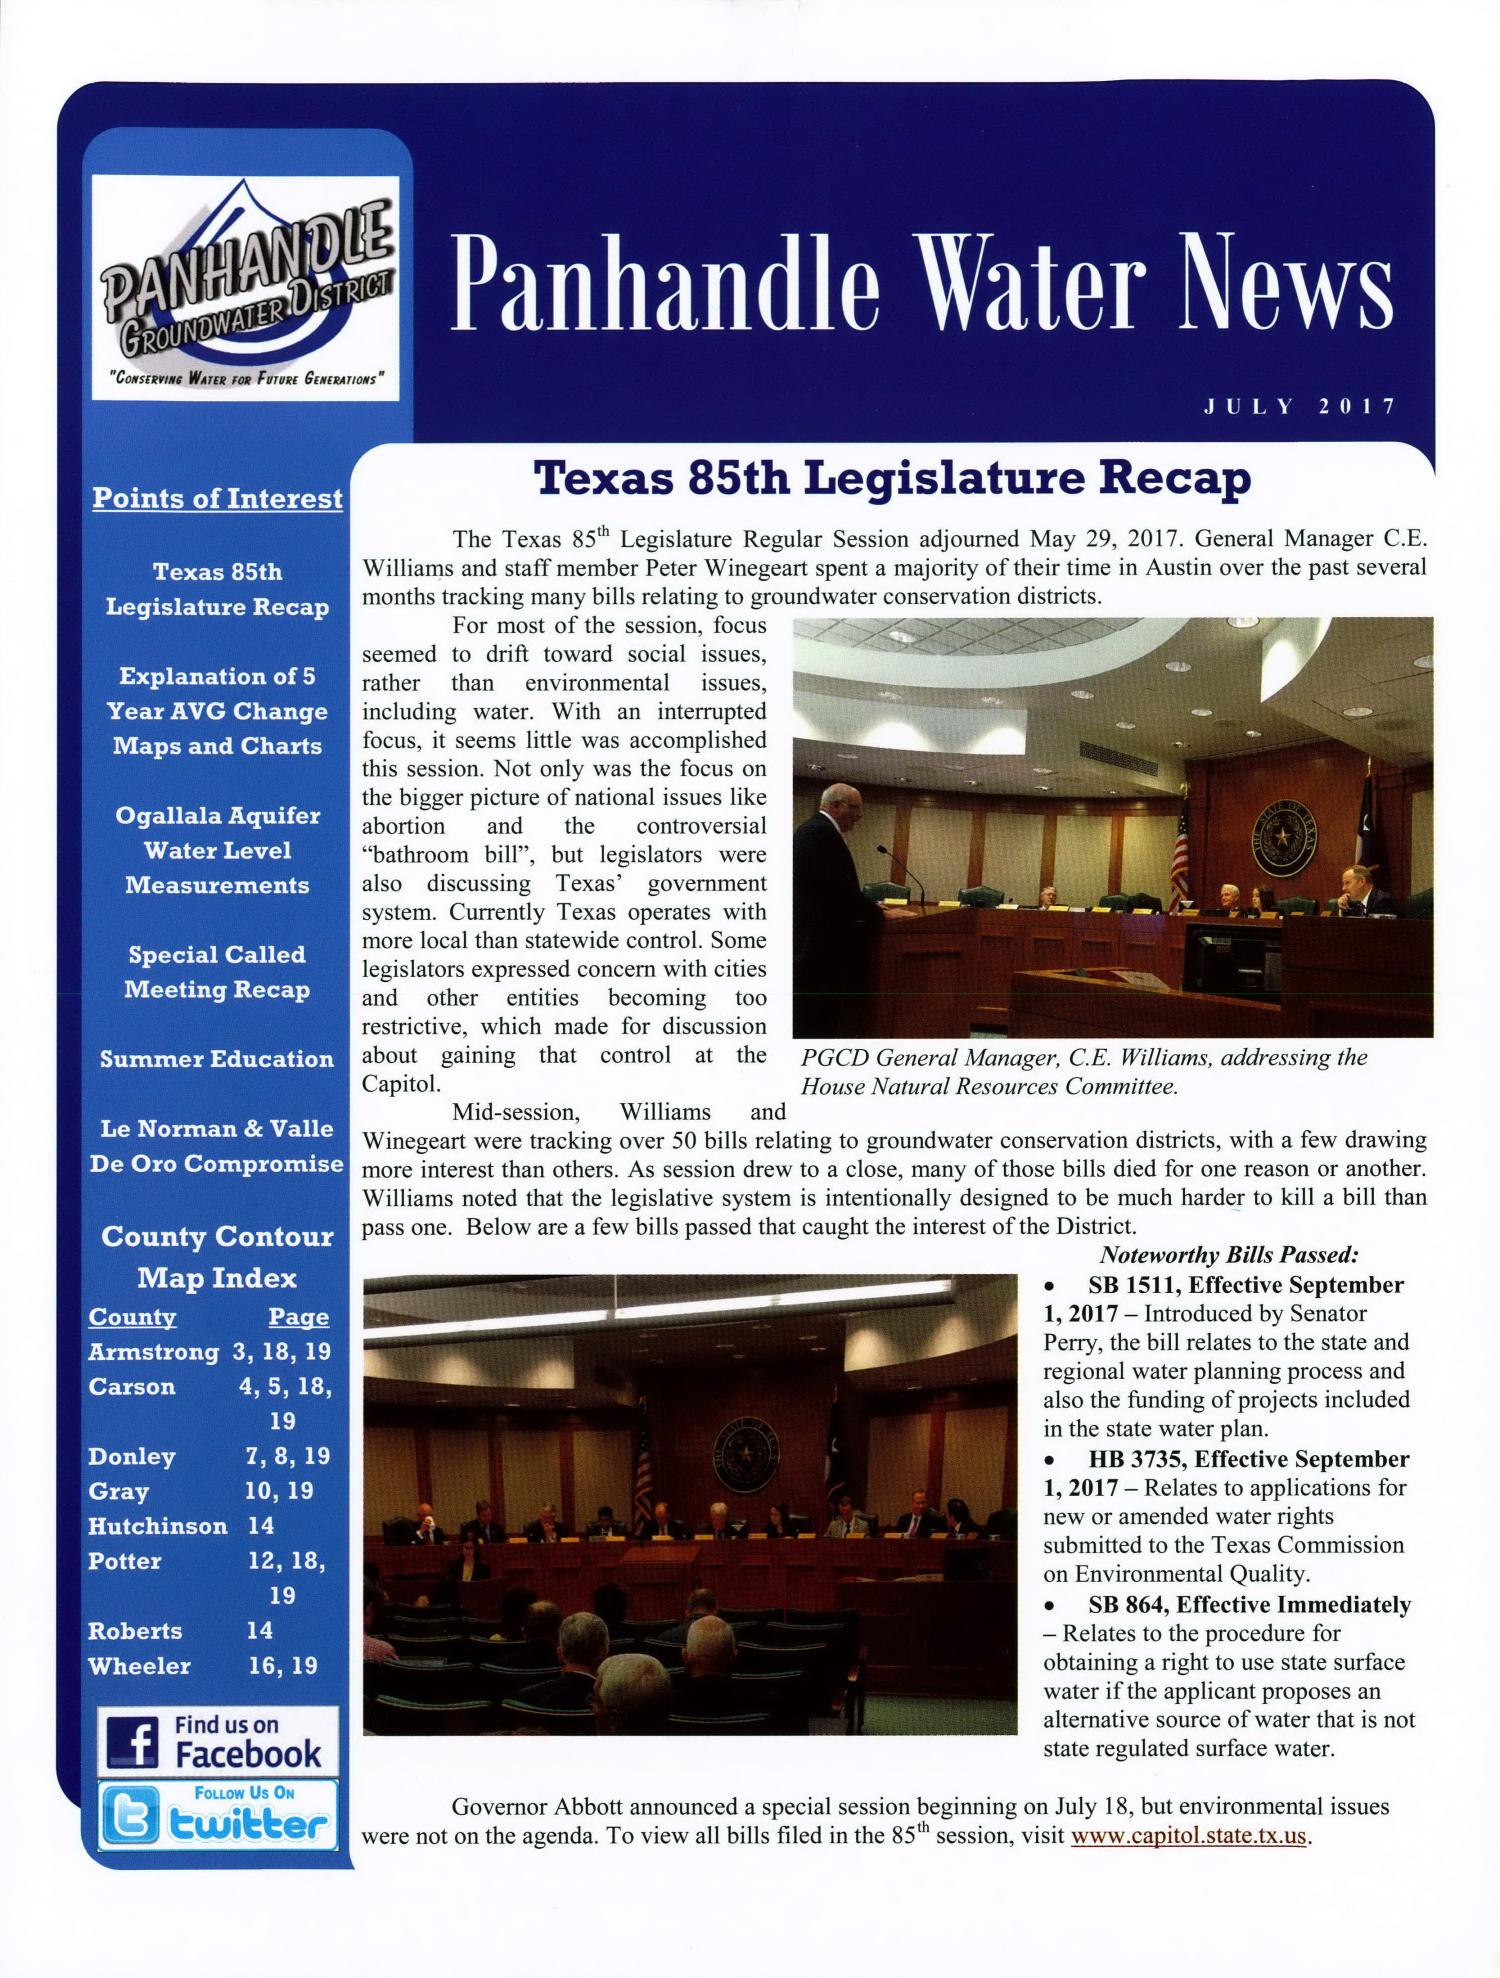 Panhandle Water News, July 2017
                                                
                                                    Front Cover
                                                